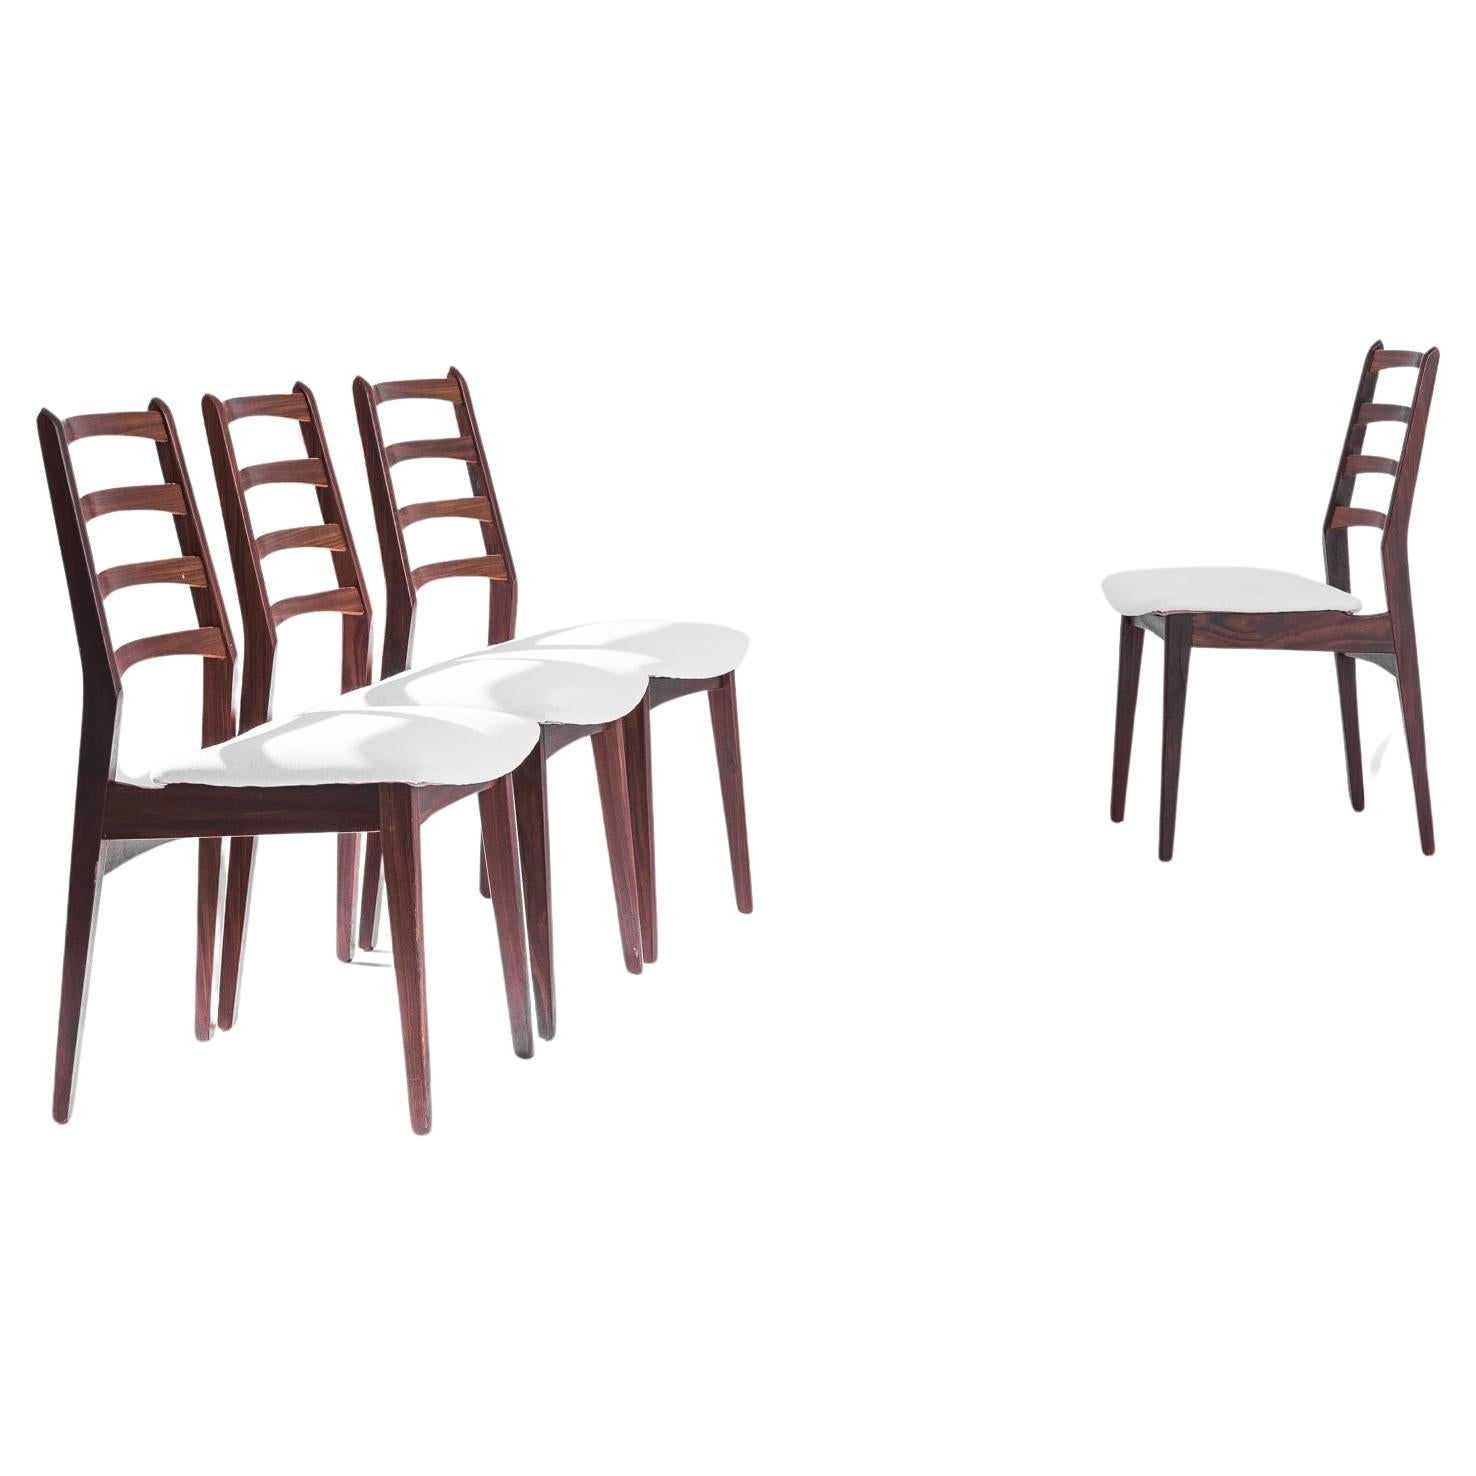 1960s Danish Teak Chairs with Upholstered Seats, Set of 4 For Sale